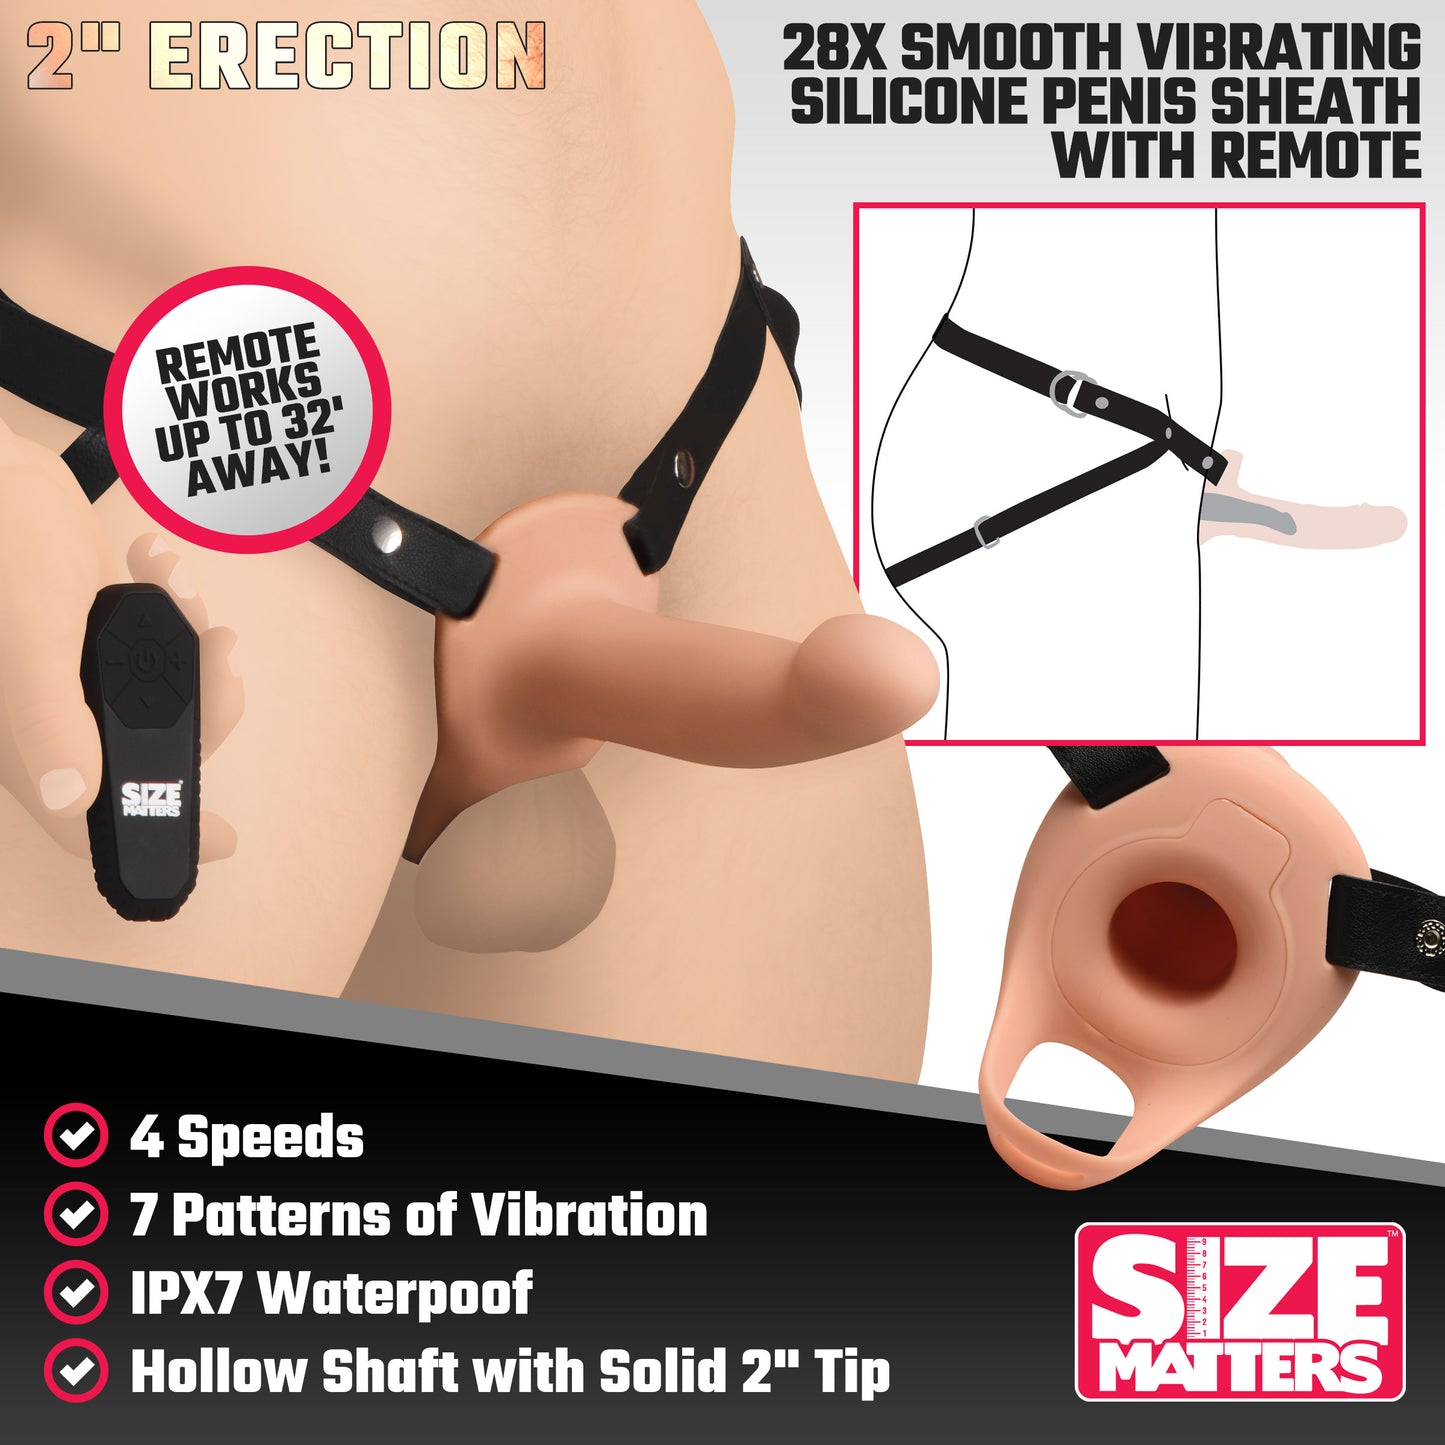 2 Inch Erection 28x Smooth Vibrating Silicone Penis Sheath With Remote - Light